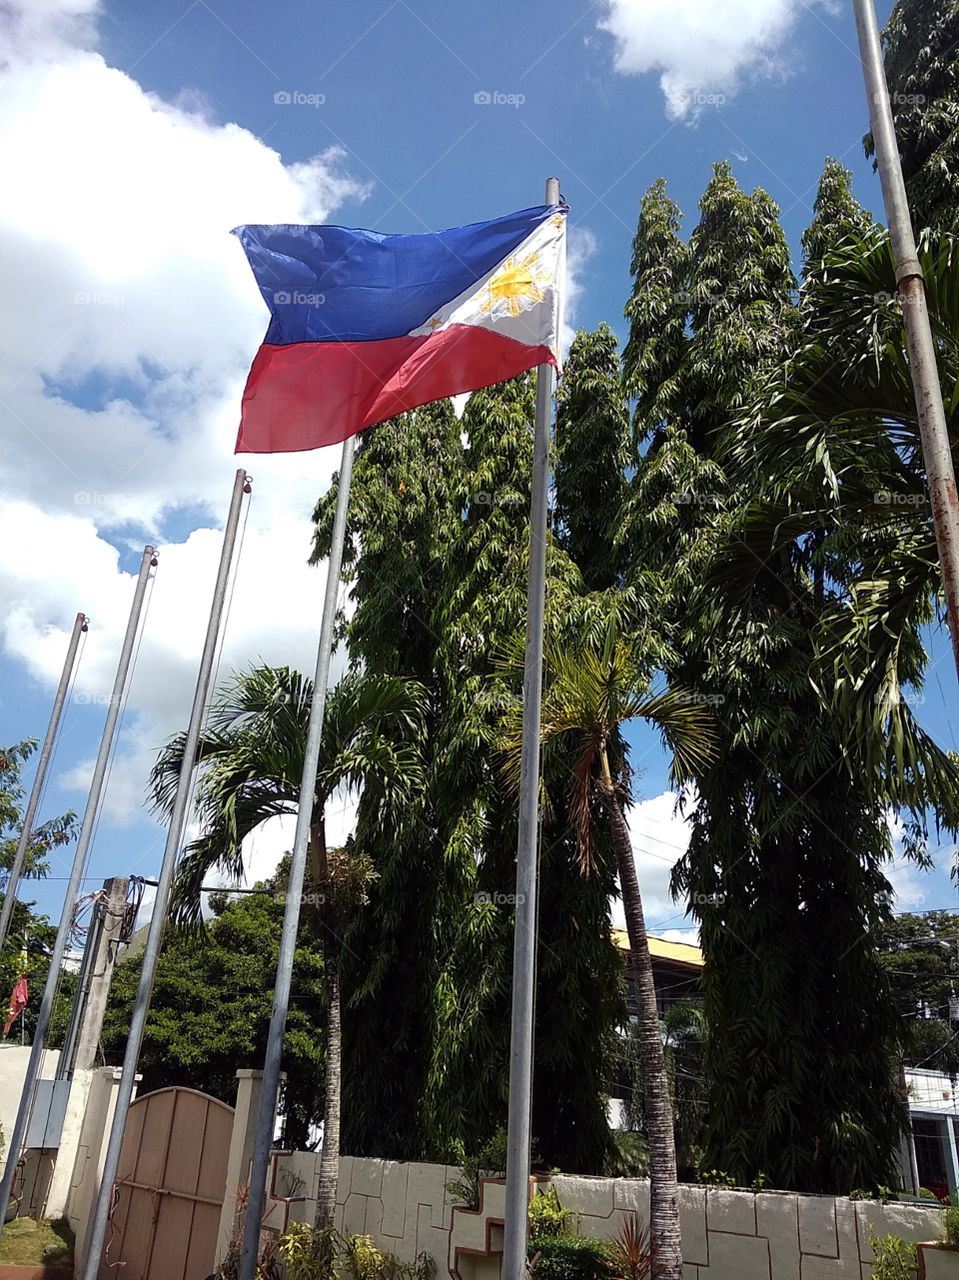 Philippine Independence Day this month of June.